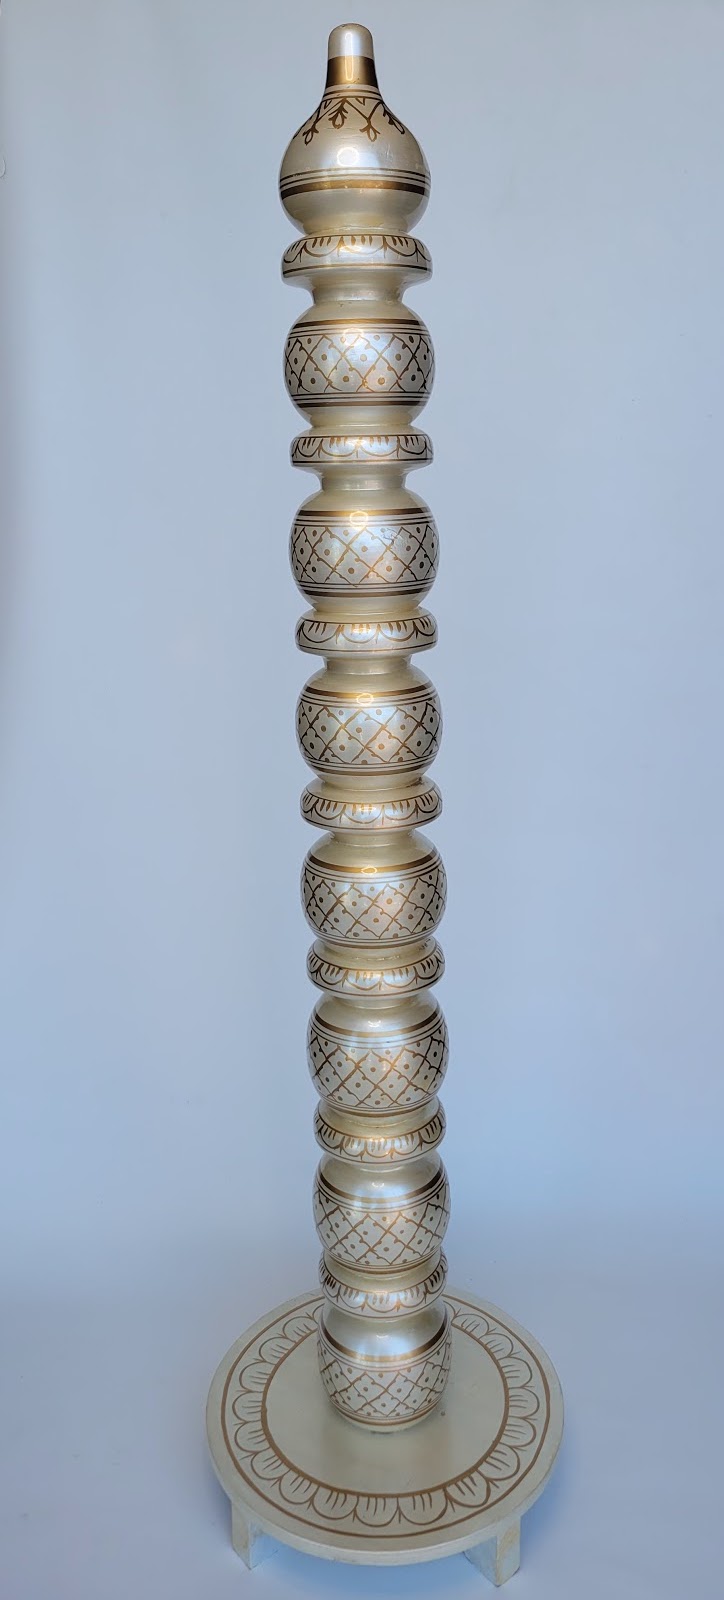 Tall White and Gold Pillar